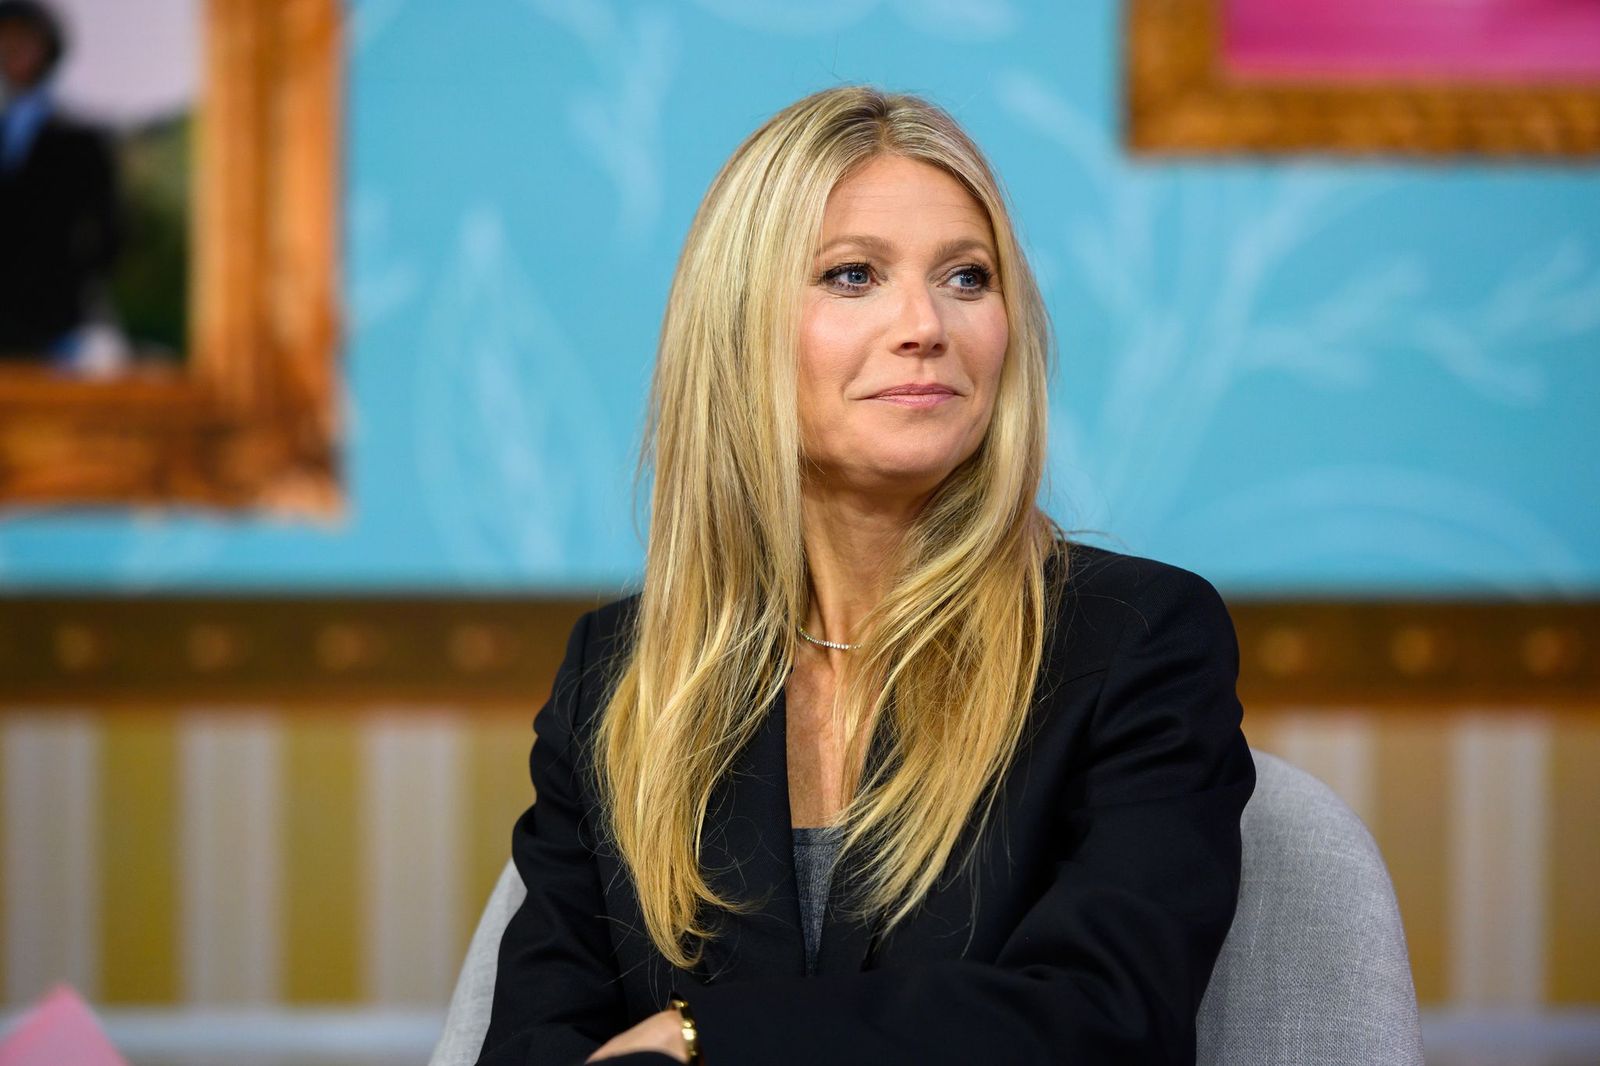 Gwyneth Paltrow on the "Today" show on September 26, 2019 | Photo: Nathan Congleton/NBCU Photo Bank/NBCUniversal/Getty Images